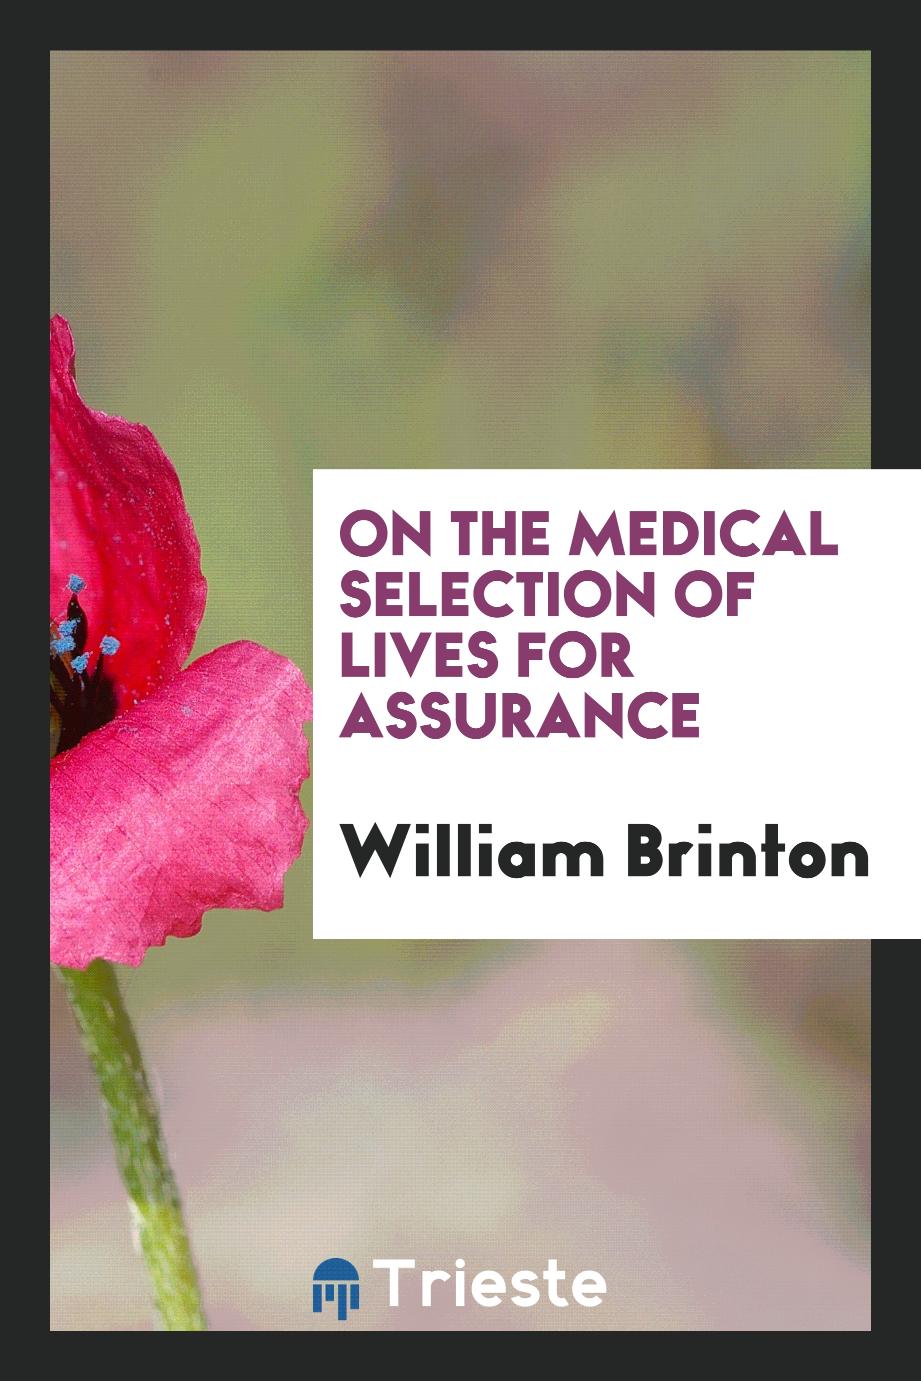 On the medical selection of lives for assurance